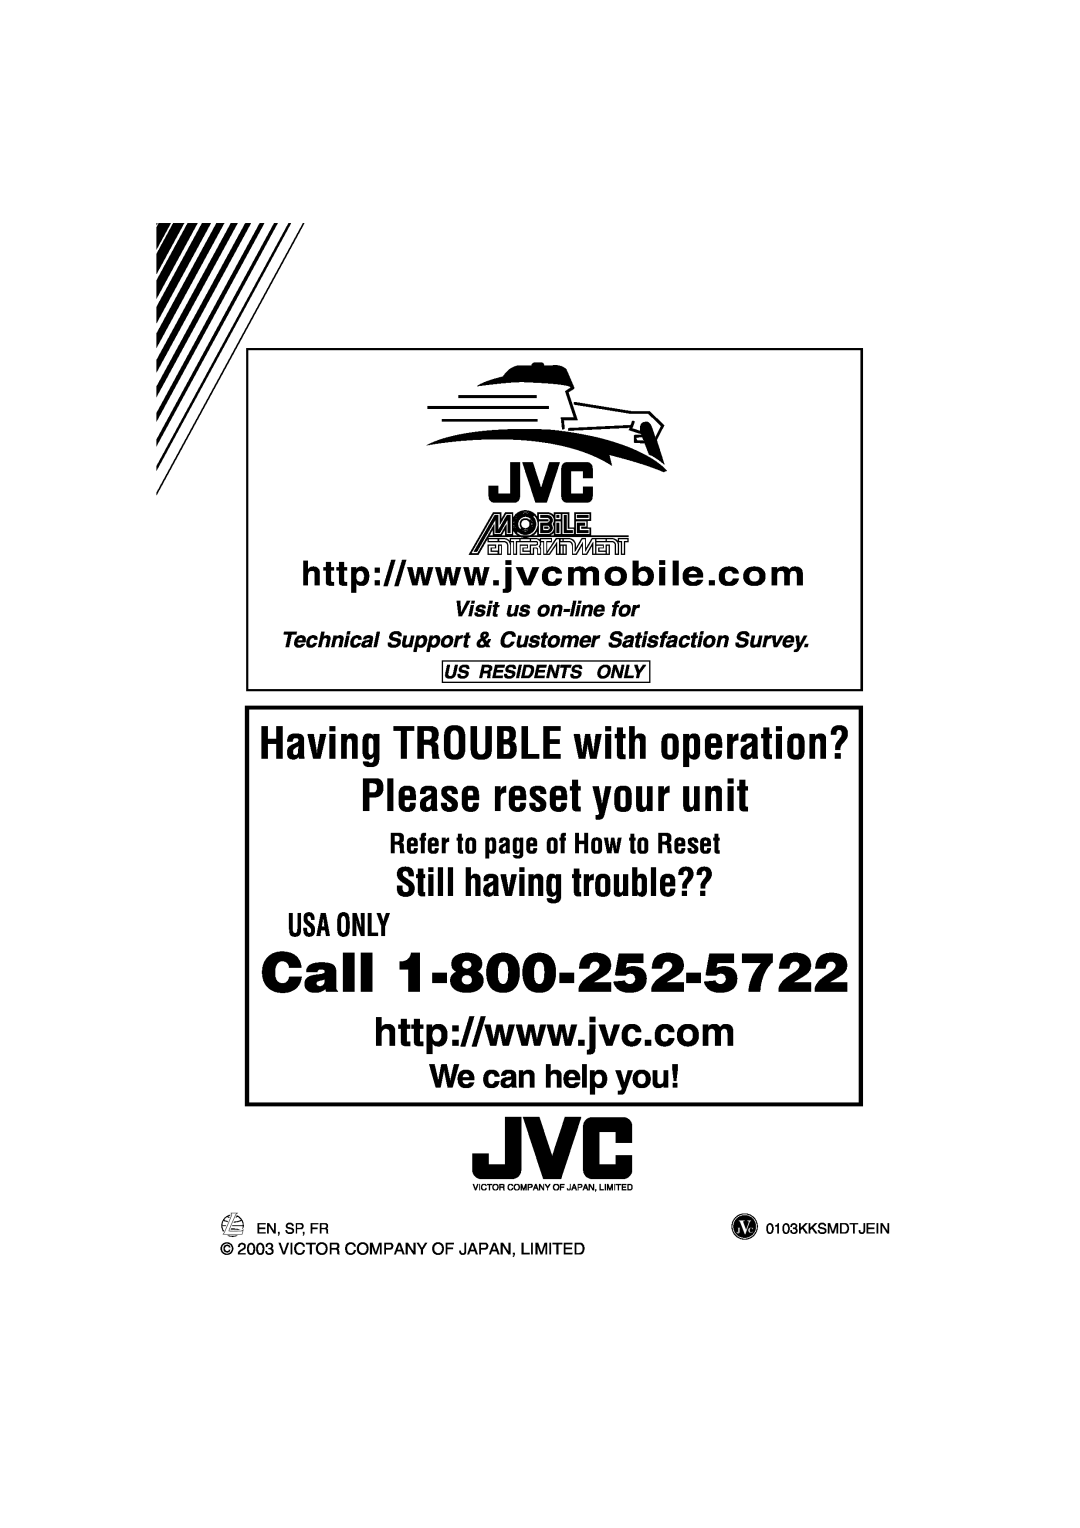 JVC KD-S890 We can help you, Visit us on-linefor, Technical Support & Customer Satisfaction Survey, Us Residents Only 